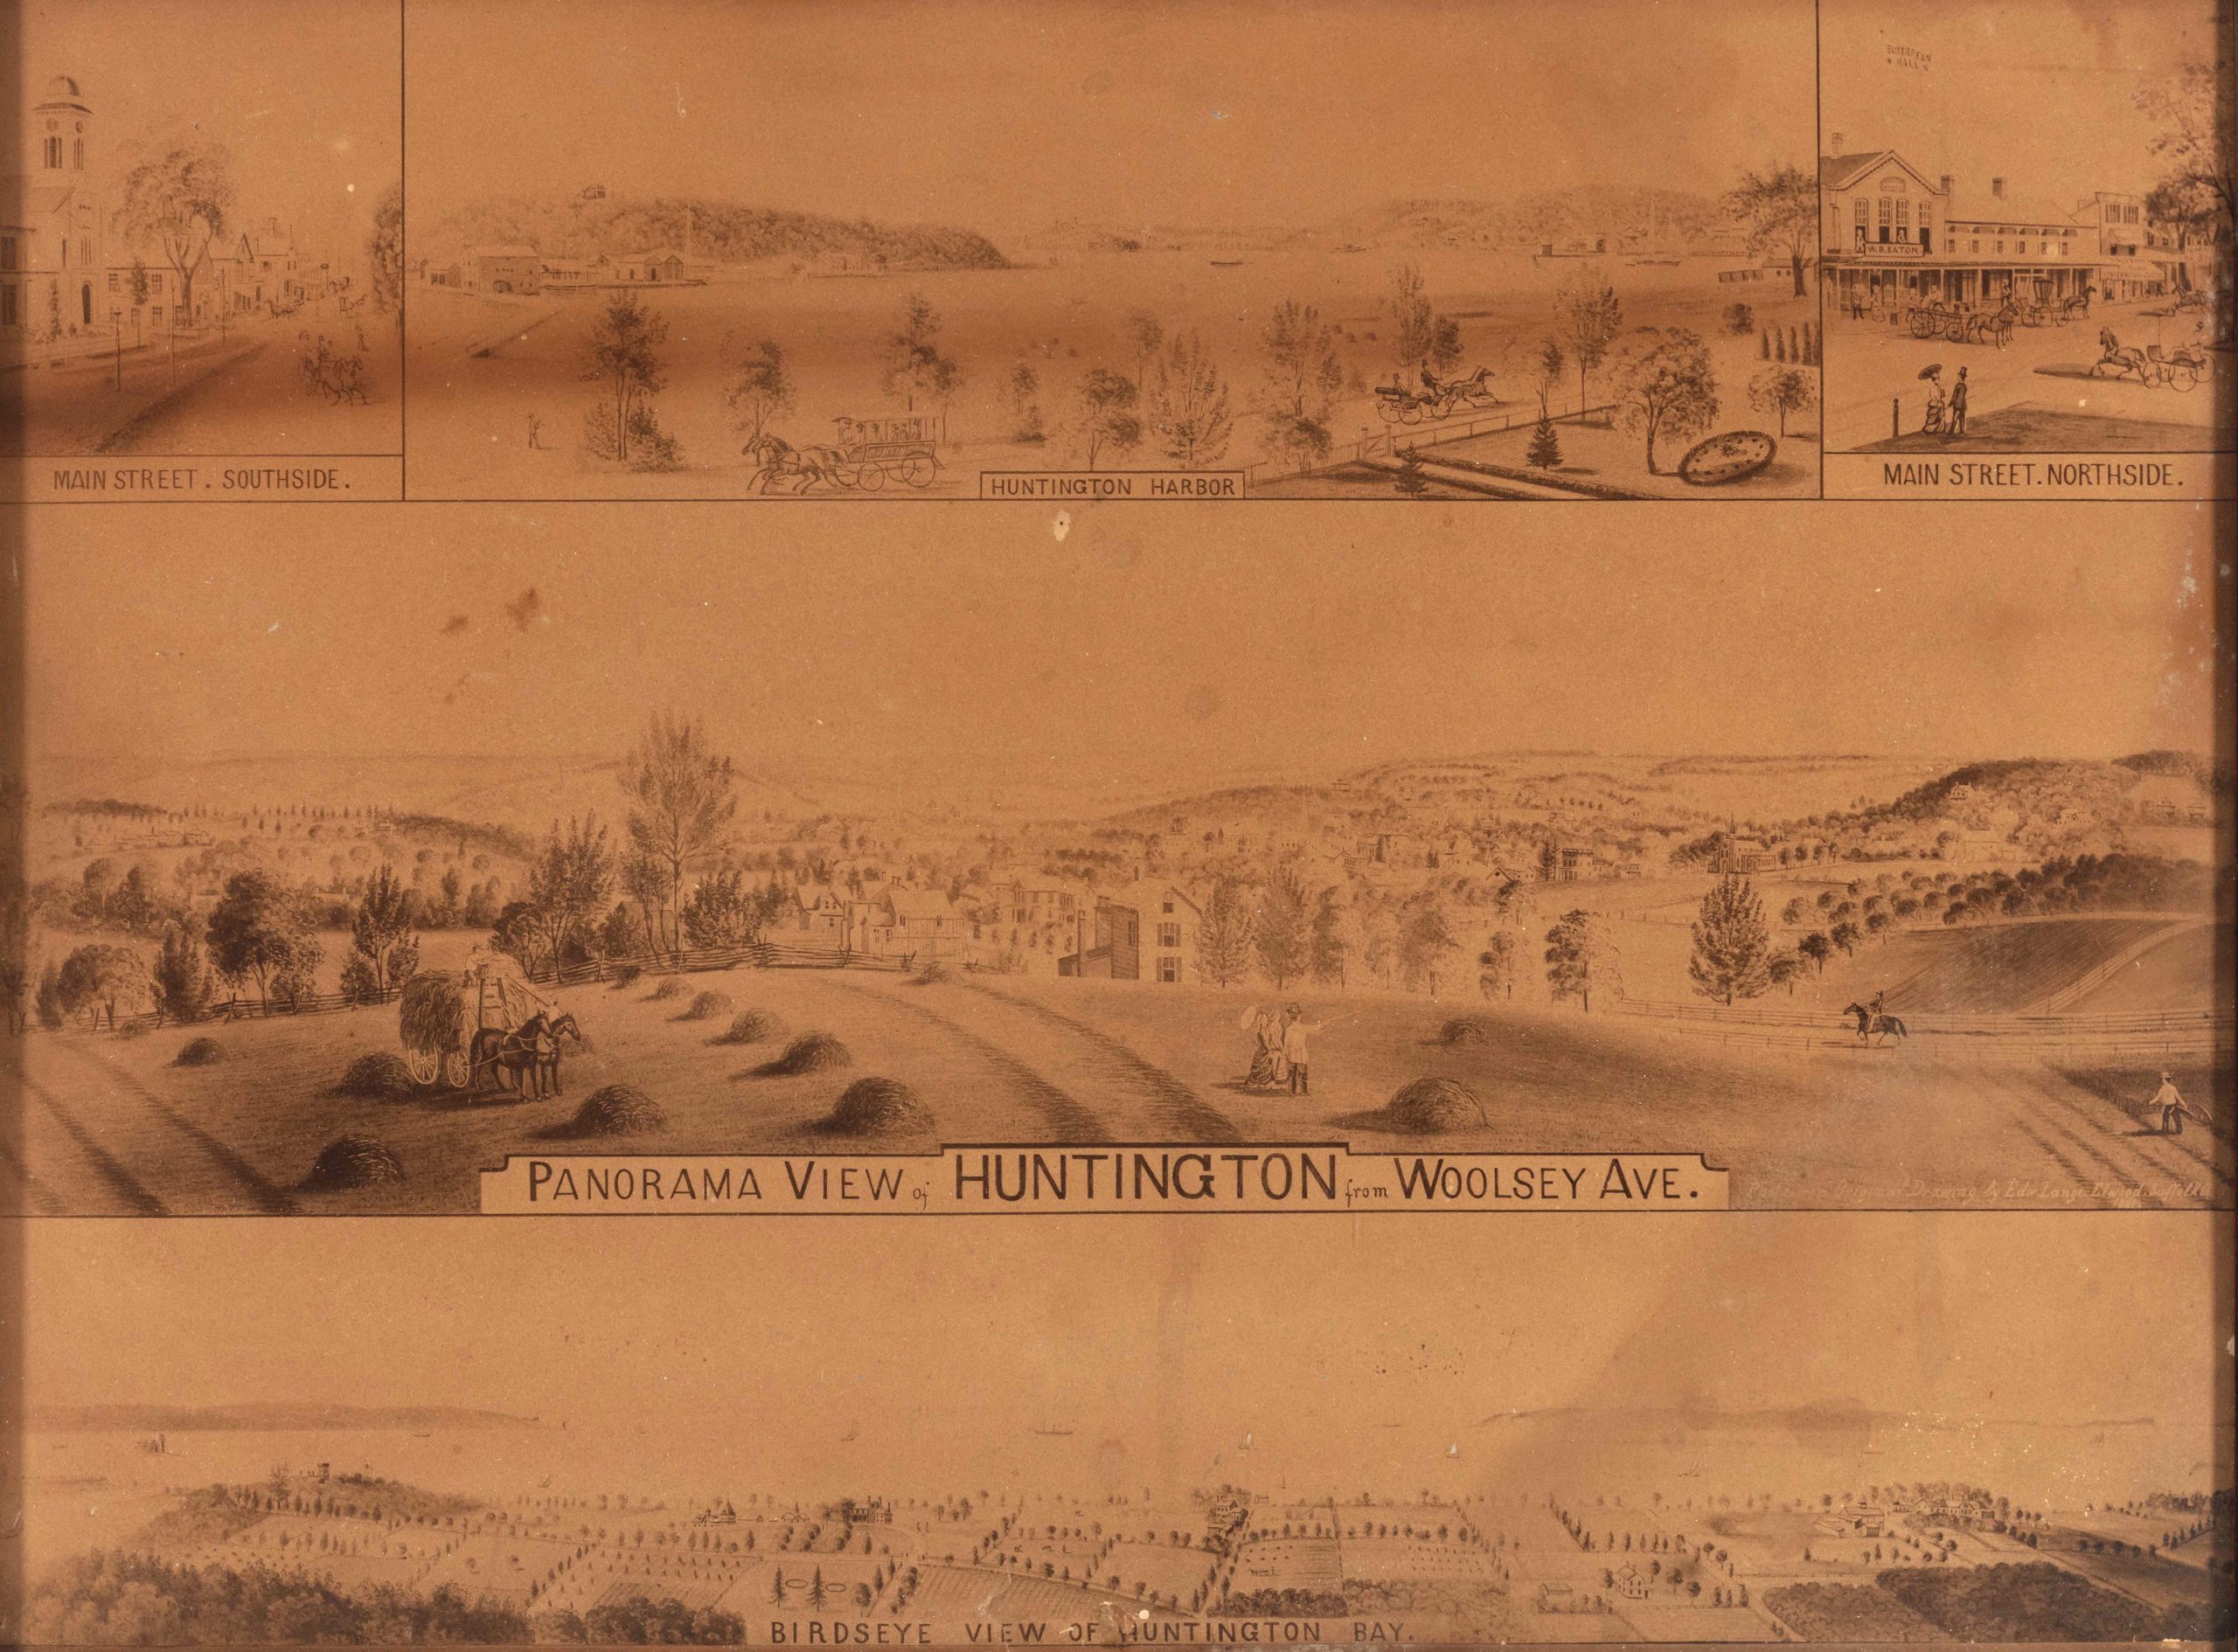 Panorama-View-of-Huntington-from-Woolsey-Avenue-Huntington-Historical-Society-2017.1.1_cropped-scaled.jpg